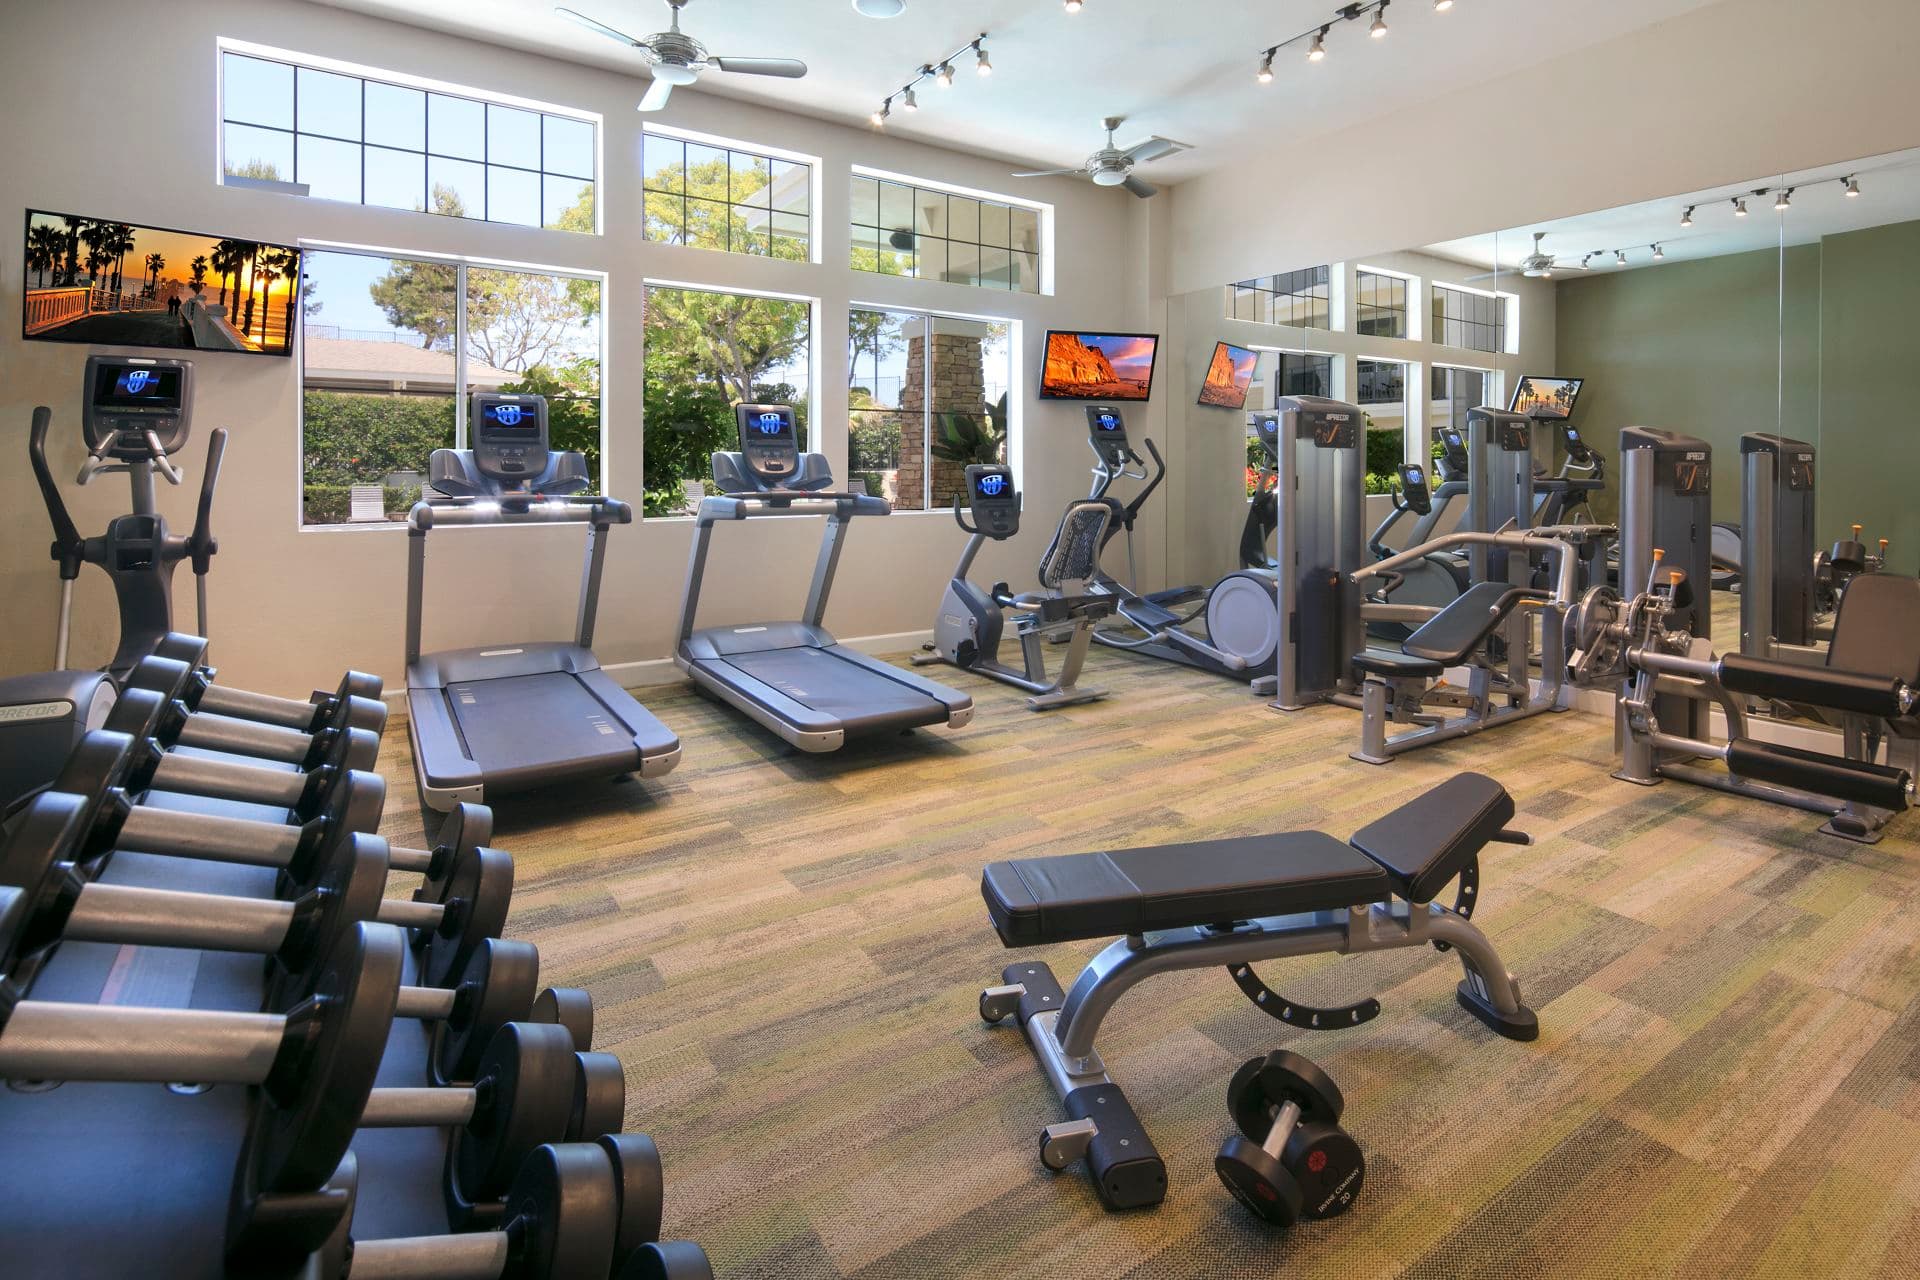 Interior view of fitness center at Marbella Apartment Homes in San Diego, CA.